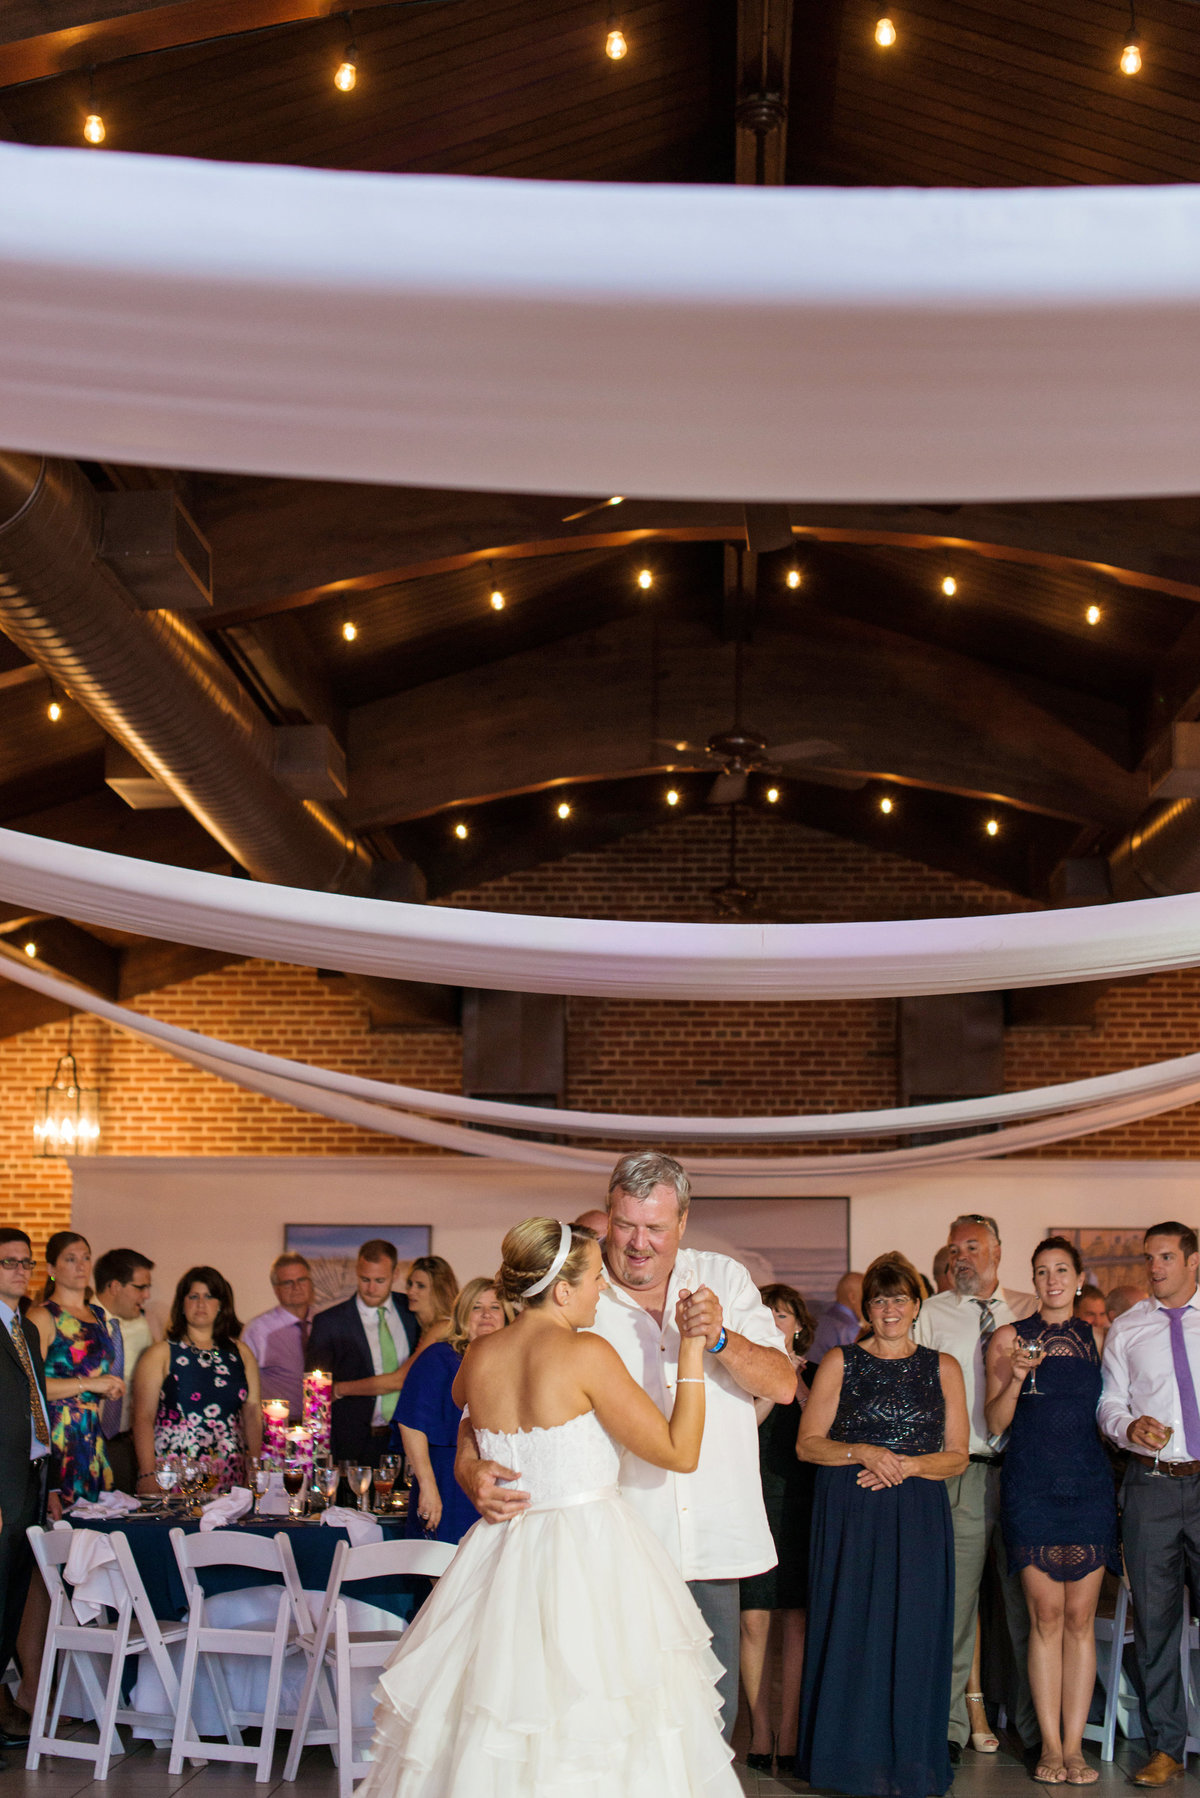 photo of bride dancing with dad during wedding reception at Pavilion at Sunken Meadow